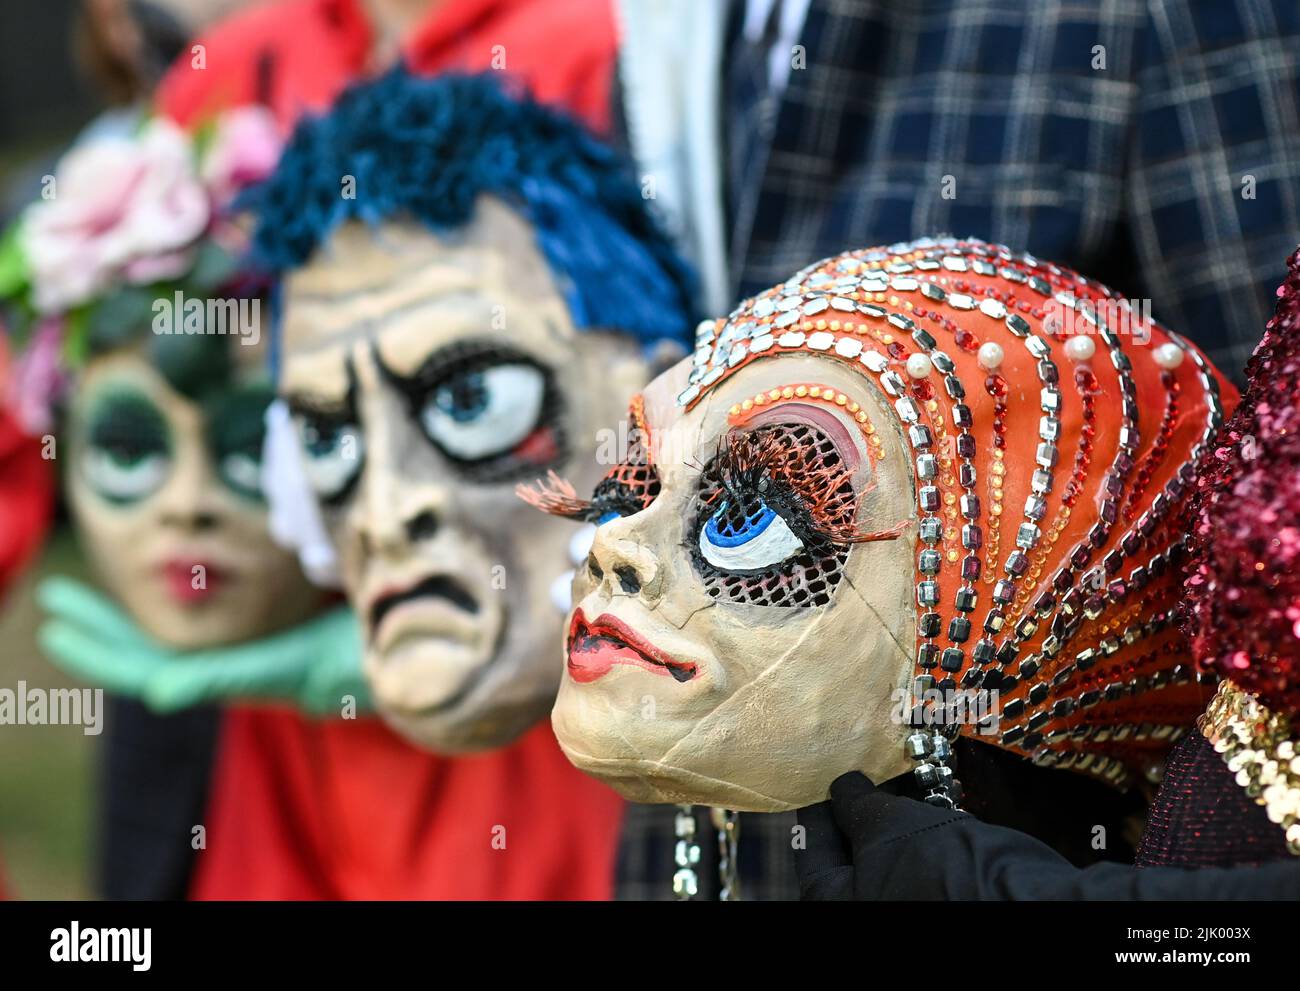 Netzeband, Germany. 25th July, 2022. Performers hold their masks before a rehearsal of the play 'Metropolis' at the Theater Sommer Netzeband. The famous film by Fritz Lang and the novel of the same name will be staged open air with 28 actors in the look of the 20s with special costumes. Performances are after the premiere on July 29 always on Fridays and Saturdays until August 27. Credit: Jens Kalaene/dpa/Alamy Live News Stock Photo